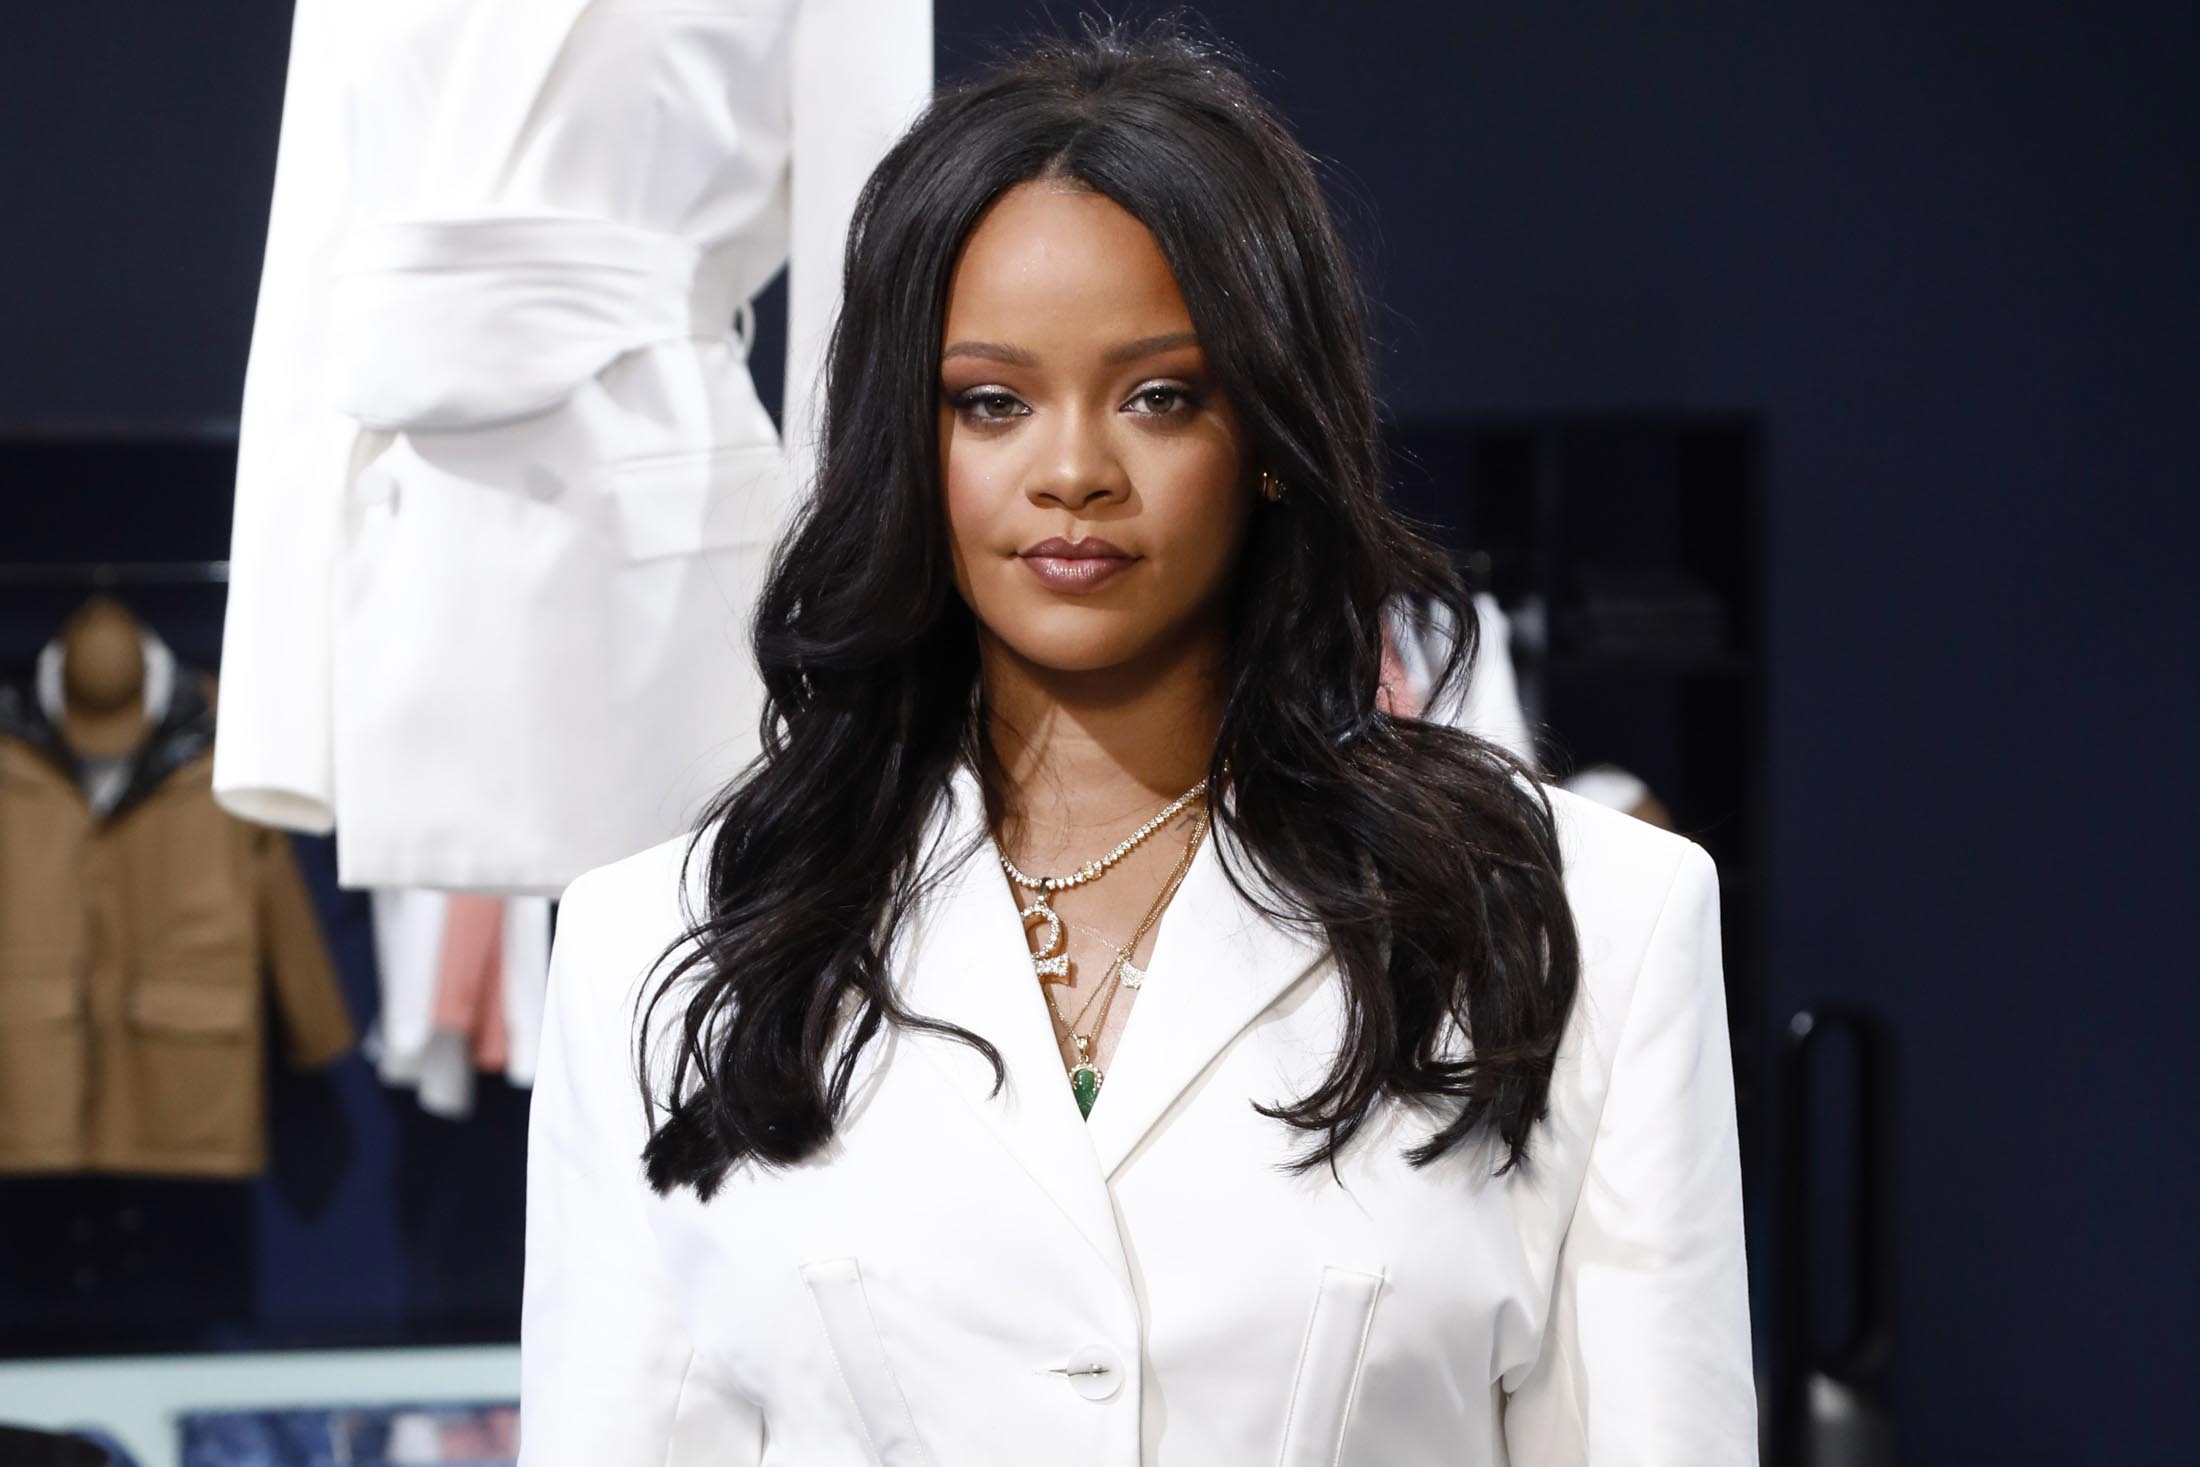 Rihanna Joins With Louis Vuitton Owners LVMH for New Fenty Fashion Line